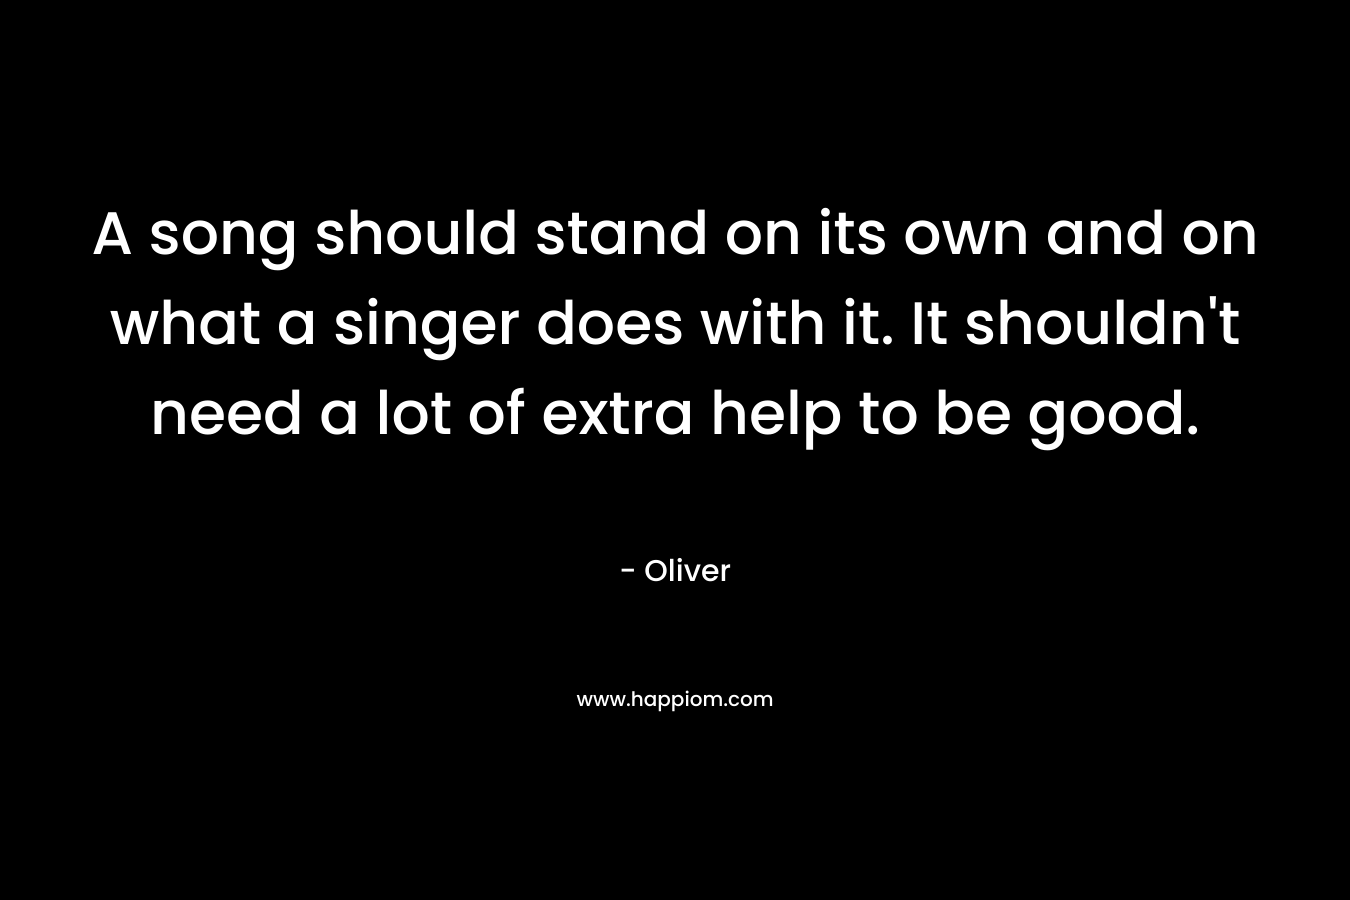 A song should stand on its own and on what a singer does with it. It shouldn’t need a lot of extra help to be good. – Oliver